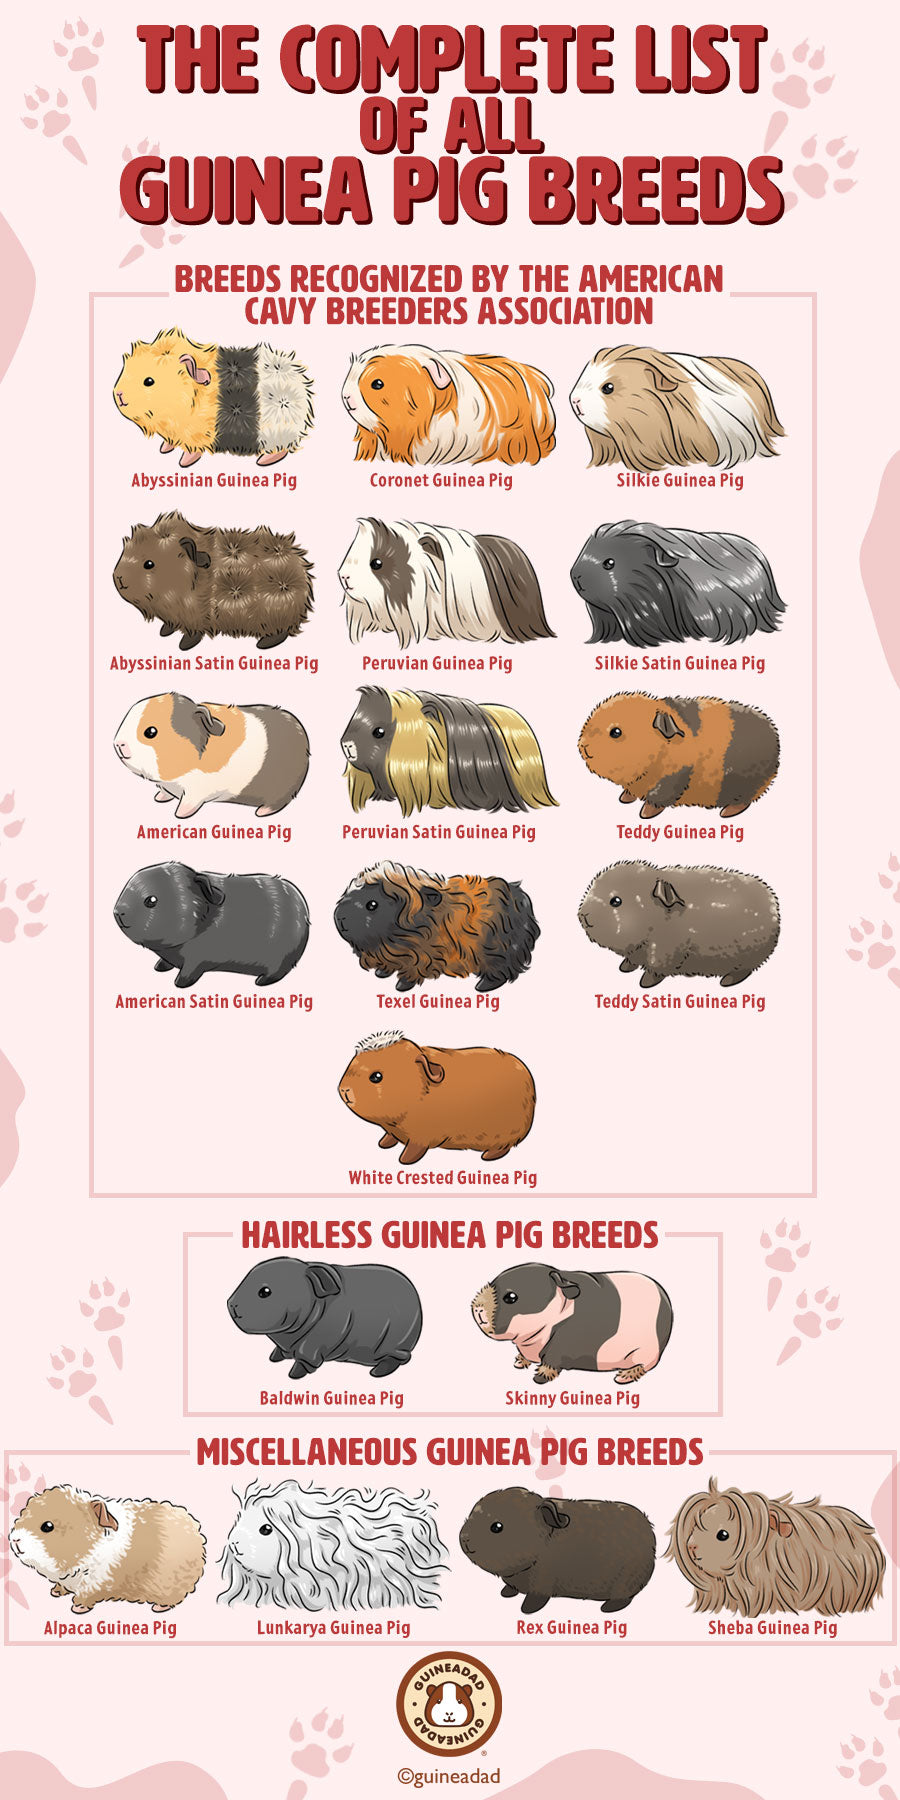 The Complete List of All Guinea Pig Breeds